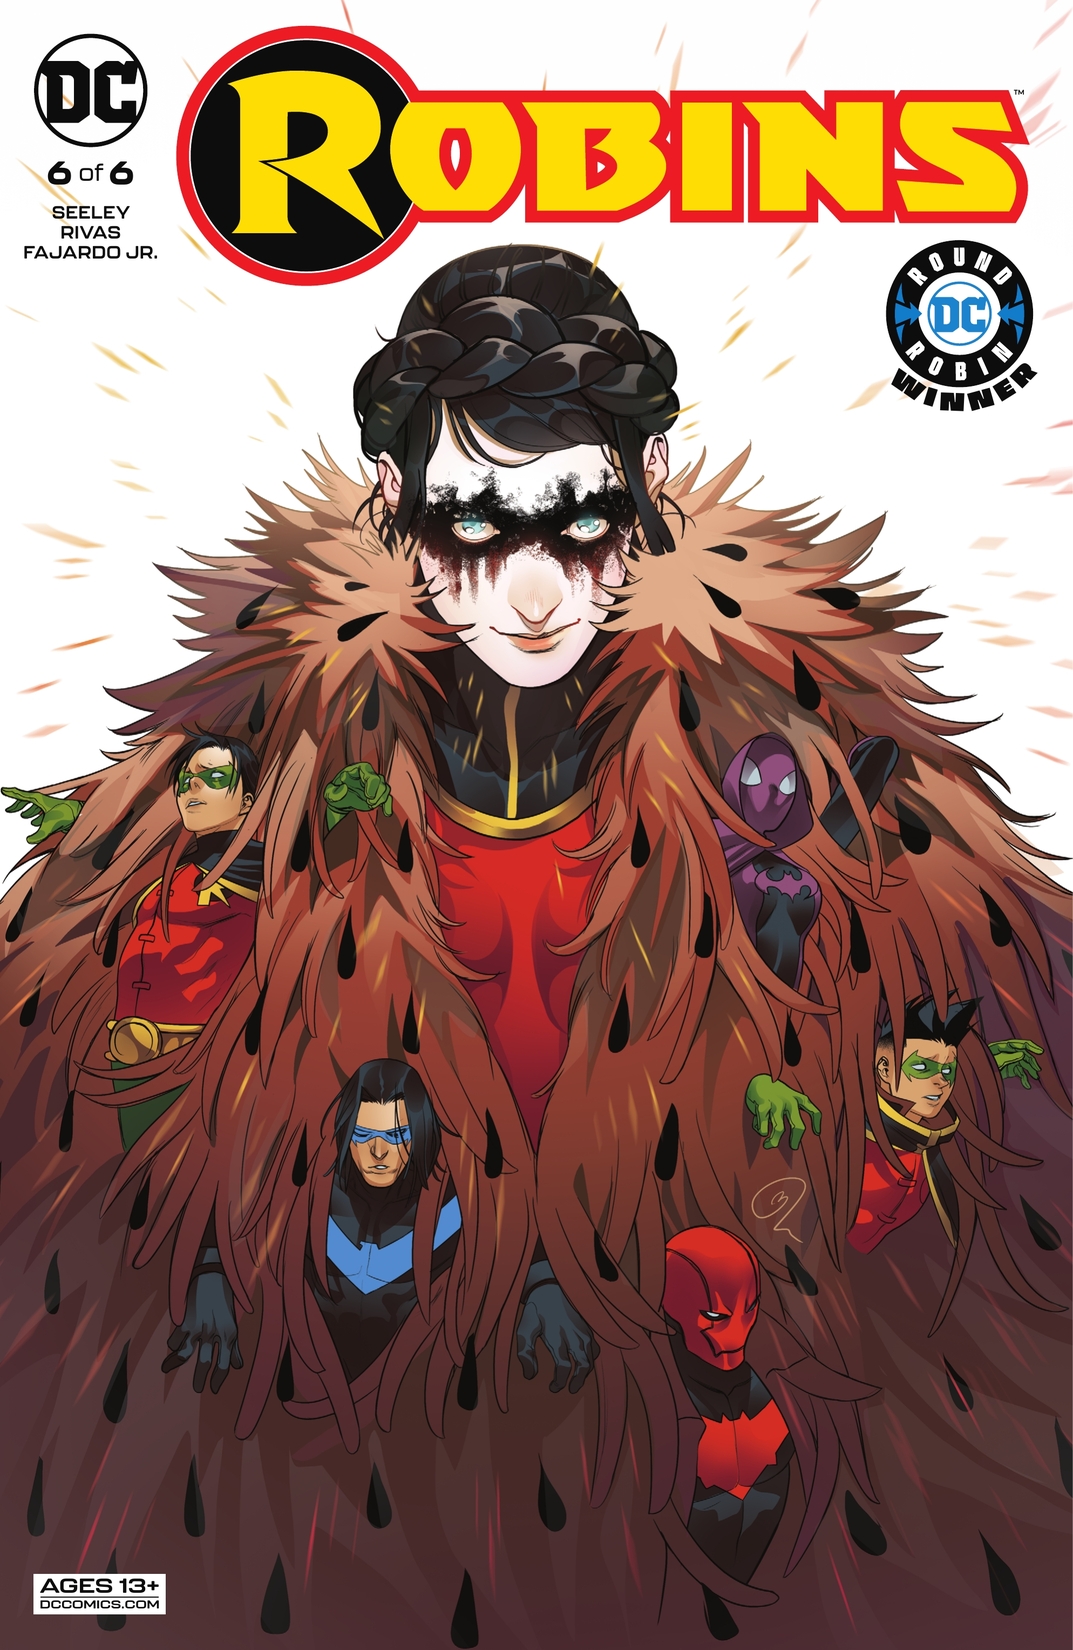 Robins #6 preview images